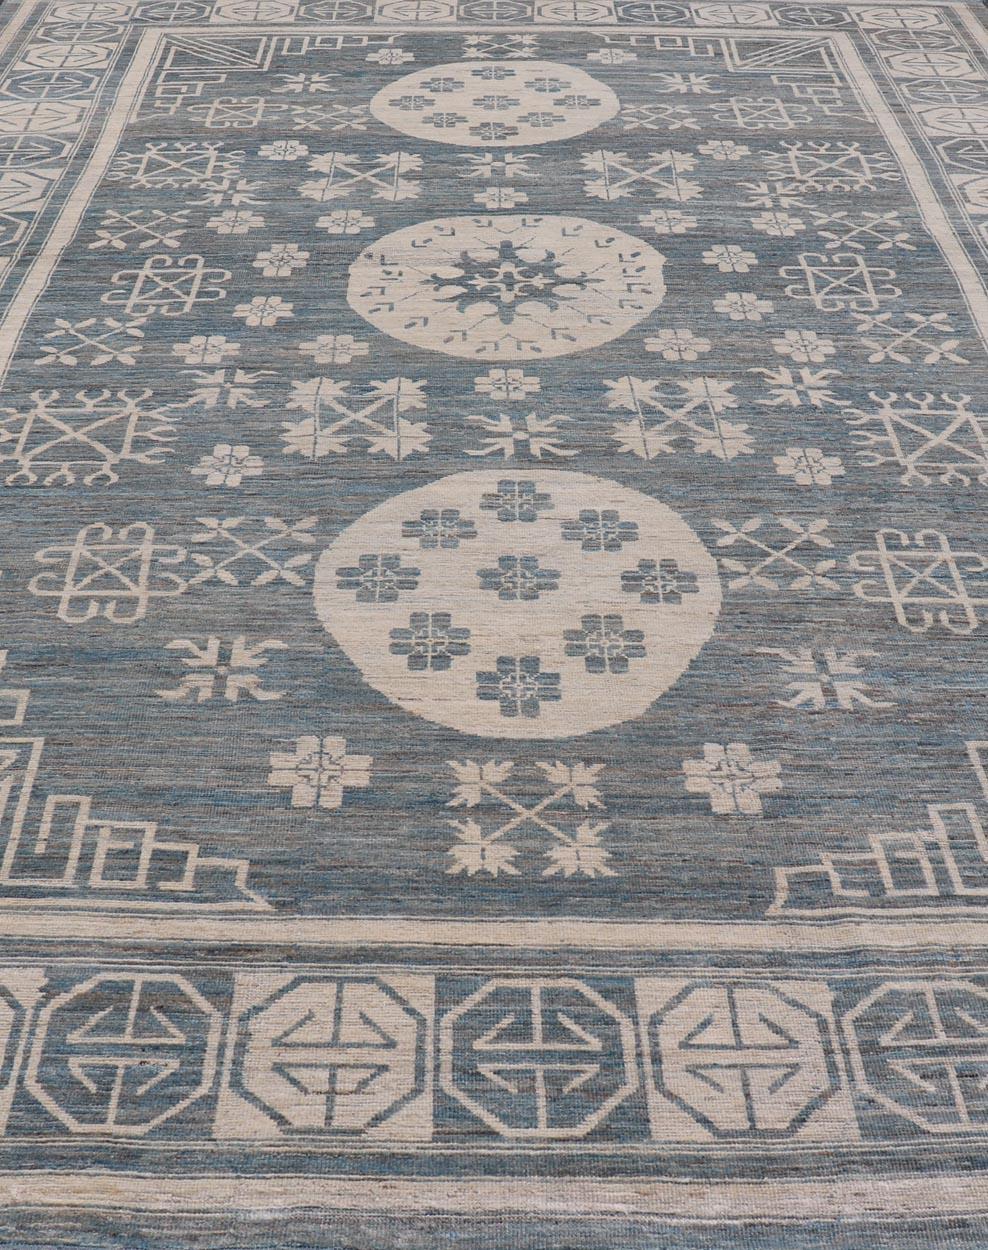 Modern Khotan Rug with Circular Medallions in Shades of Steel Blue & off White For Sale 5